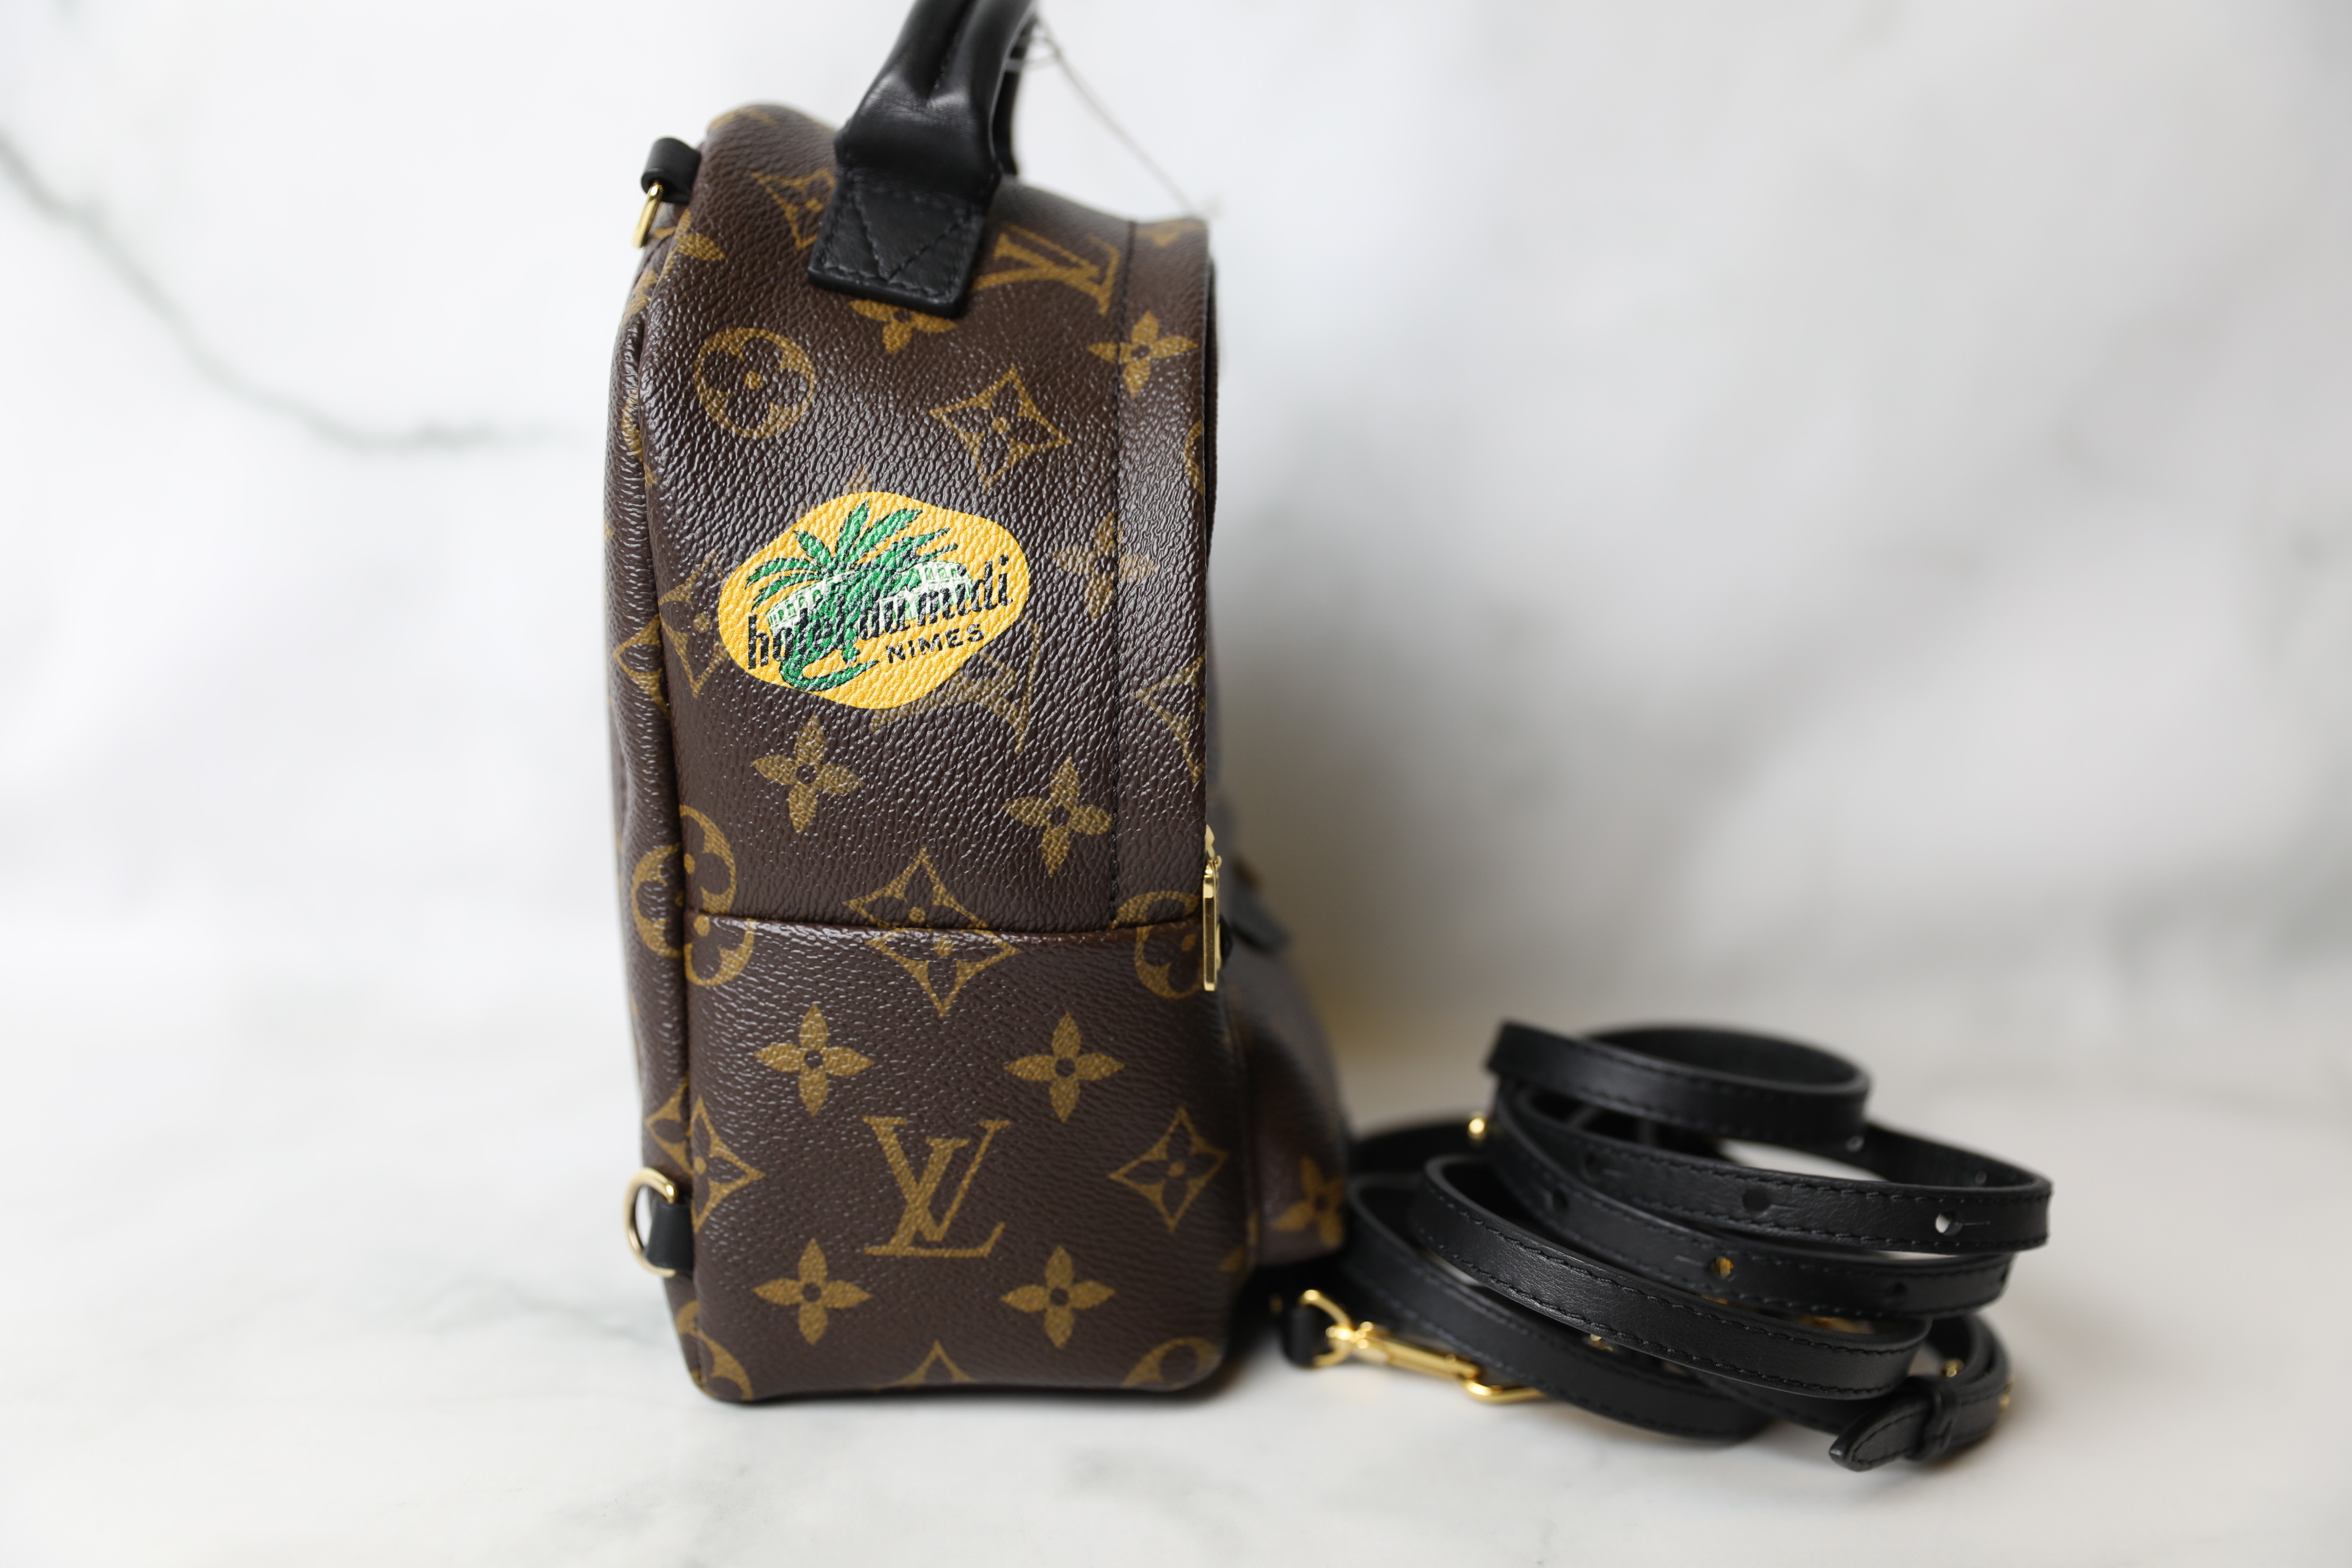 Louis Vuitton Palm Springs Backpack Limited Edition World Tour Monogram  Canvas Mini Brown 2341991